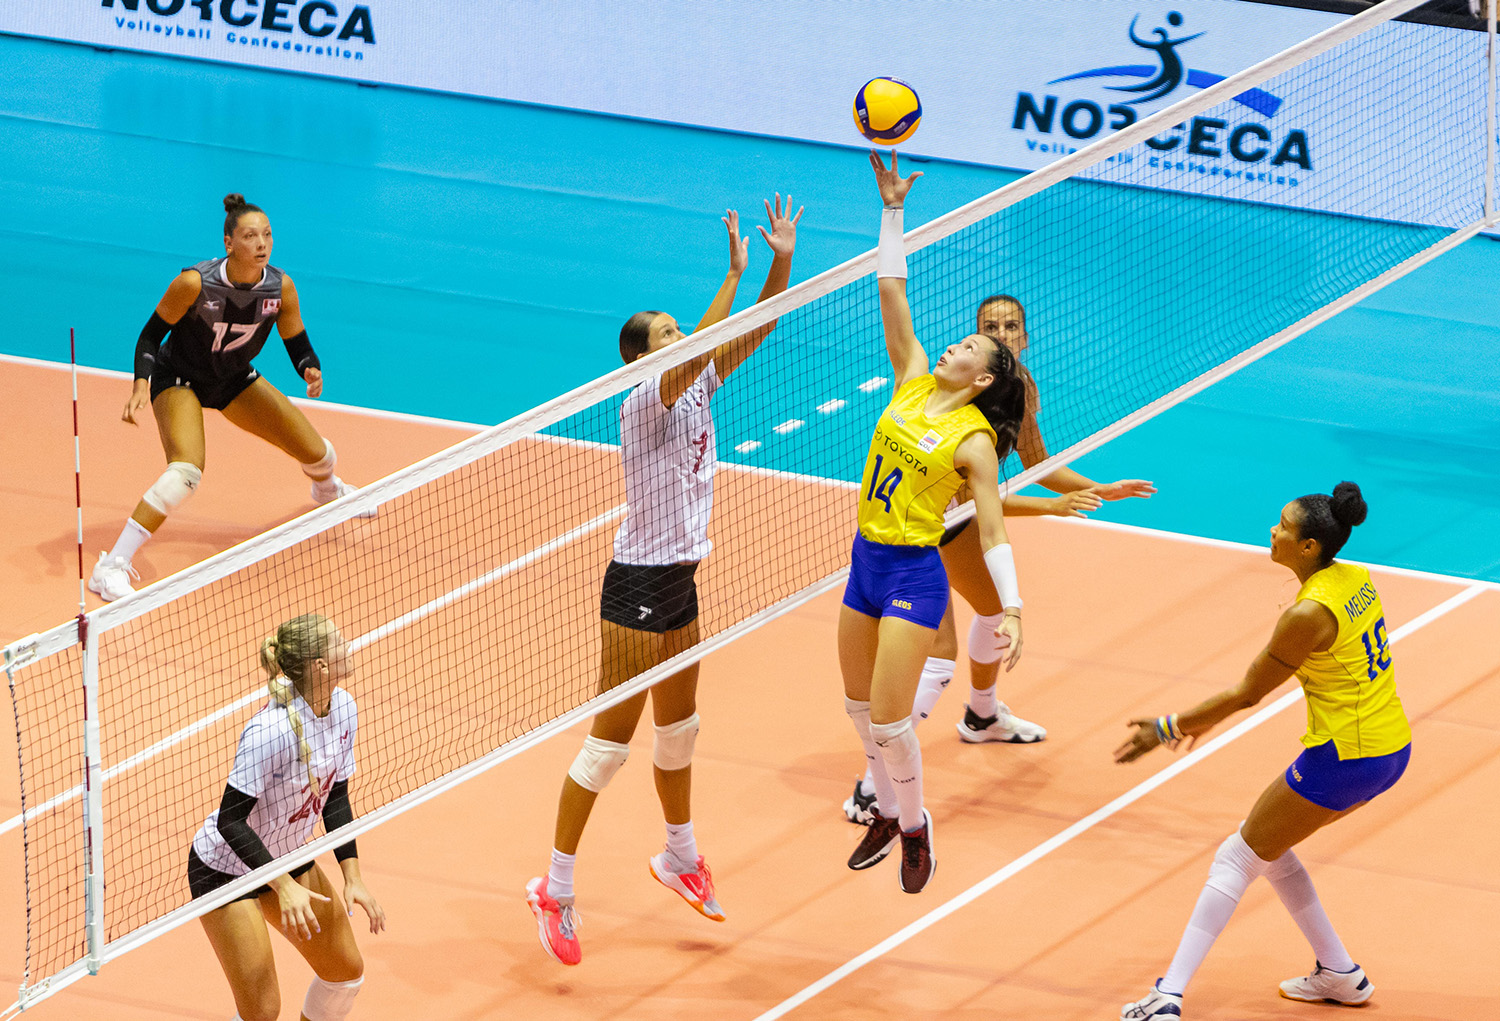 RIZOLA: “It was a very important victory against Canada”